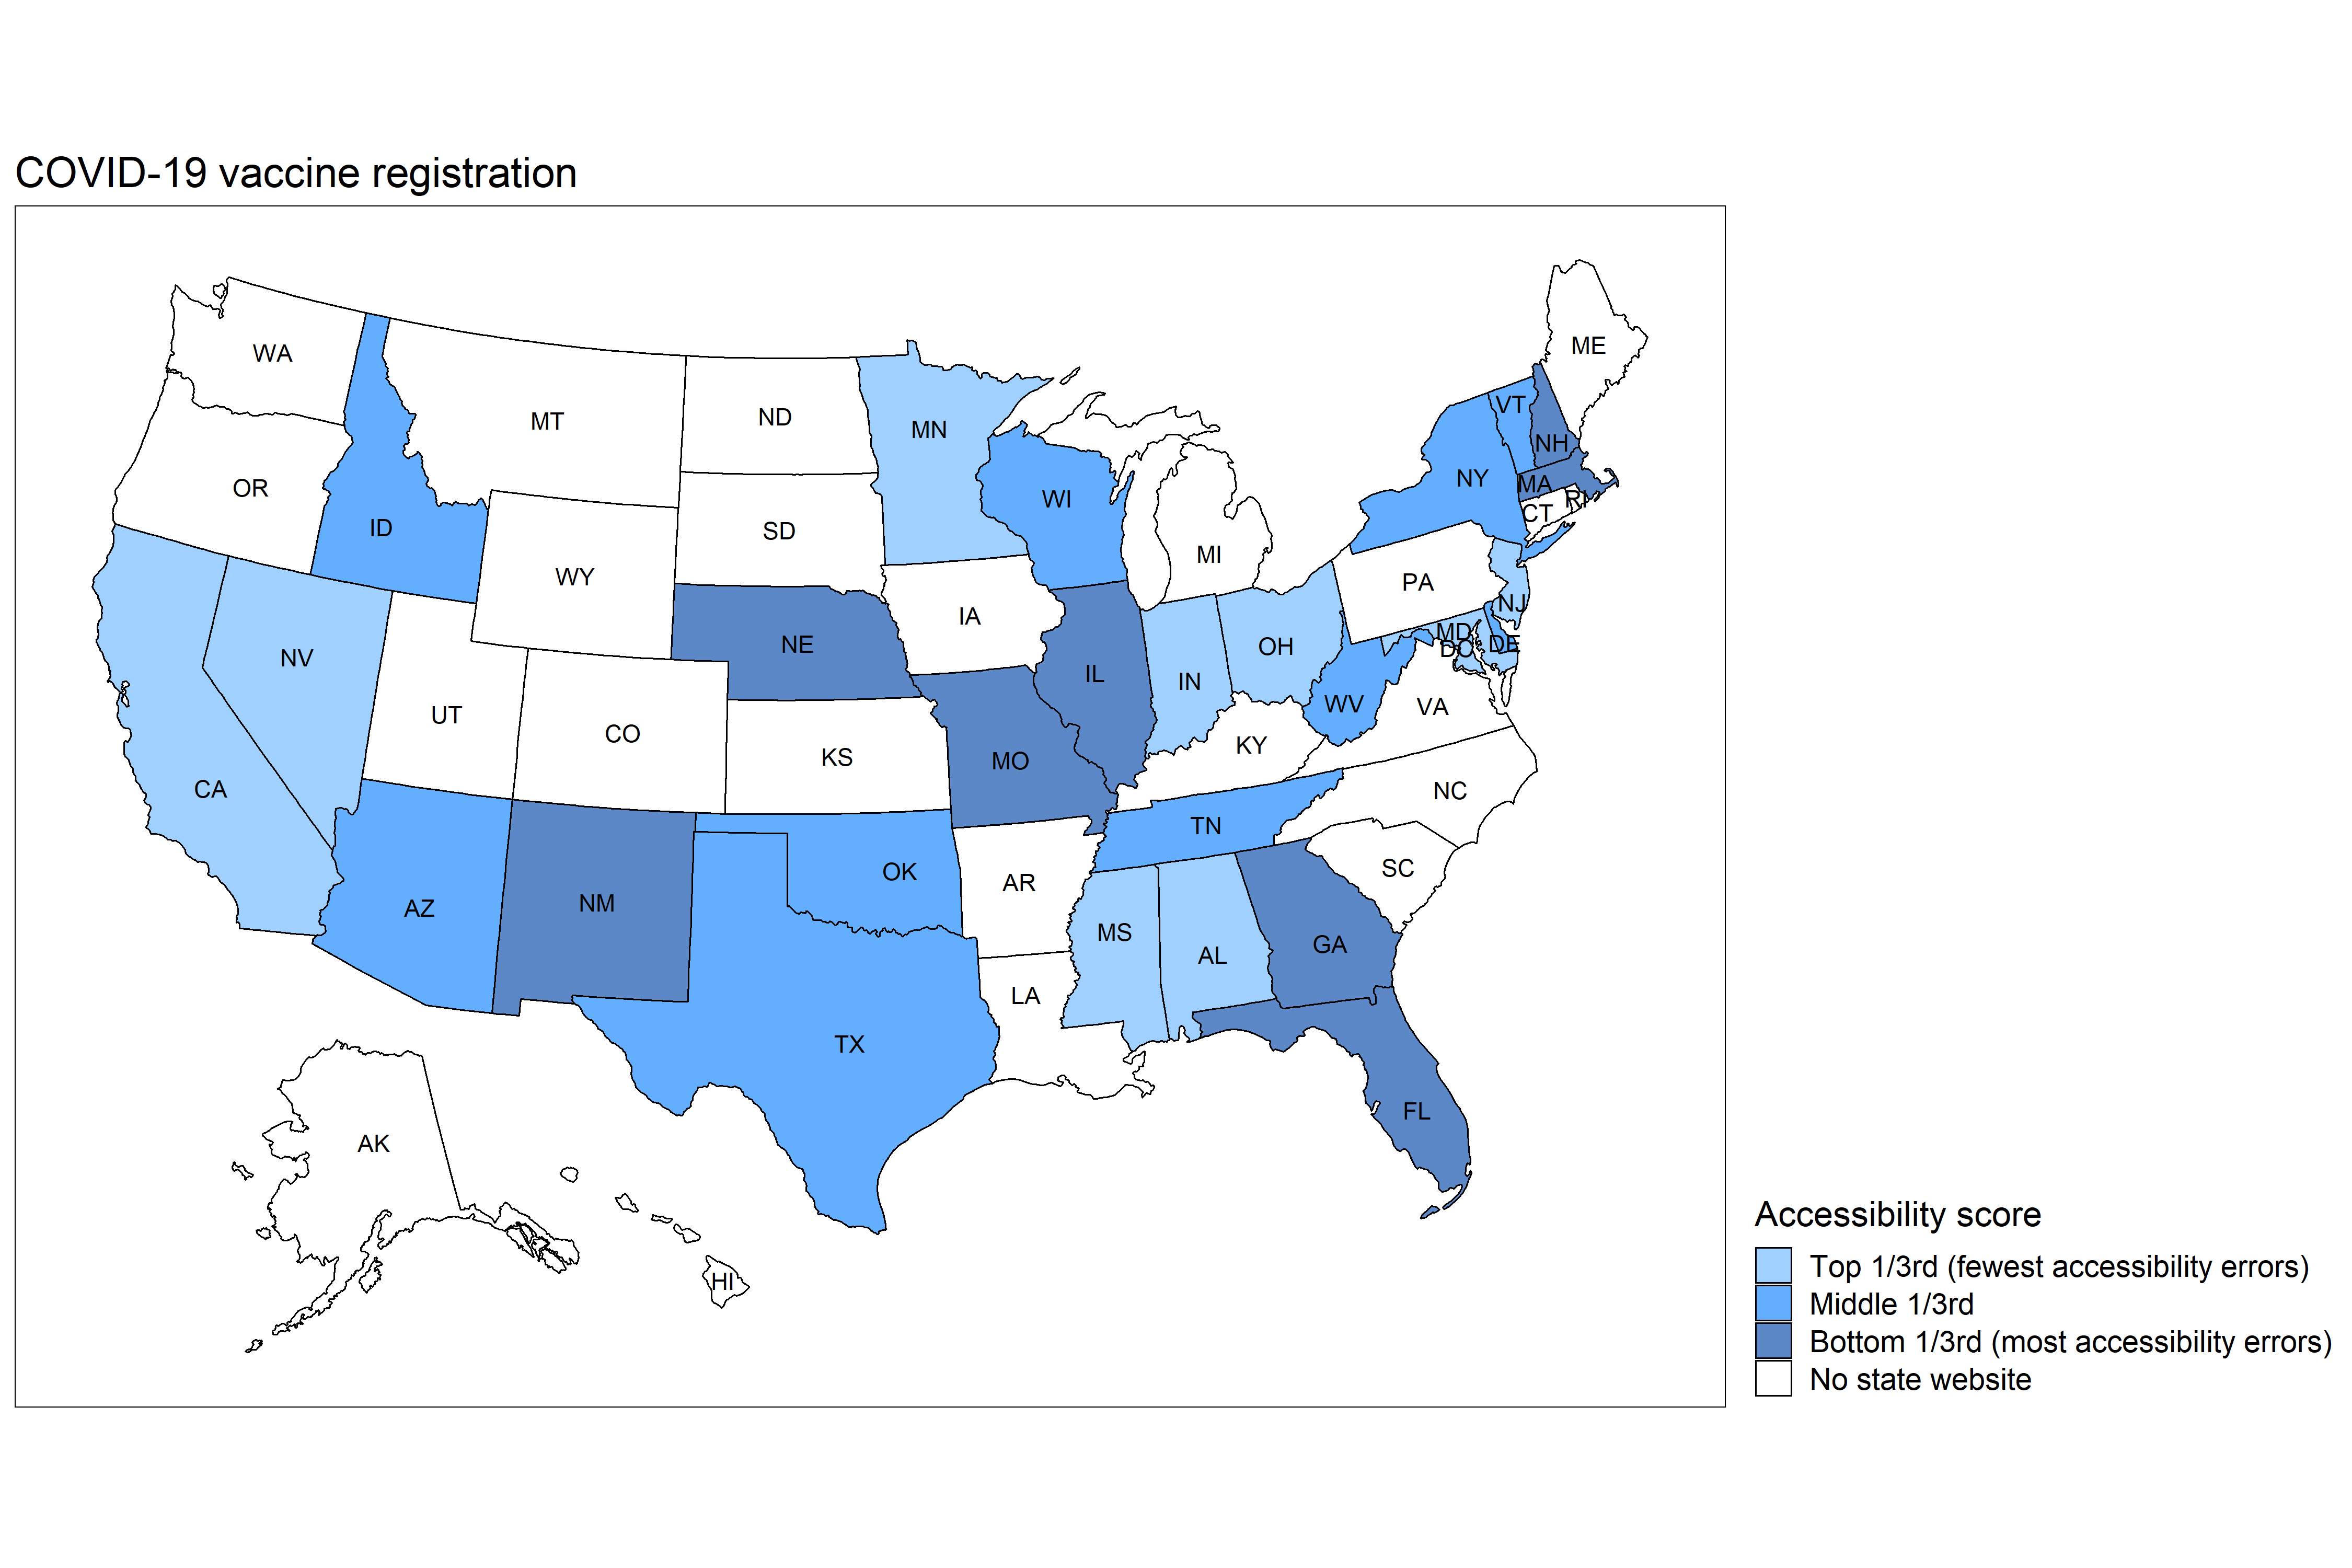 A US map showing accessibility of state vaccine registration sites in tertiles each denoted by a different shade of blue.
1st tertile: Nevada, Maryland, Mississippi, Indiana, Alabama, California, Minnesota, New Jersey, District of Columbia, Ohio
2nd tertile: Arizona, Tennessee, Oklahoma, Delaware, Vermont, West Virginia, Wisconsin, Texas, Idaho, New York
3rd tertile: Nebraska, Missouri, Massachusetts, Georgia, Northern Mariana Islands, Illinois, New Hampshire, New Mexico, Florida